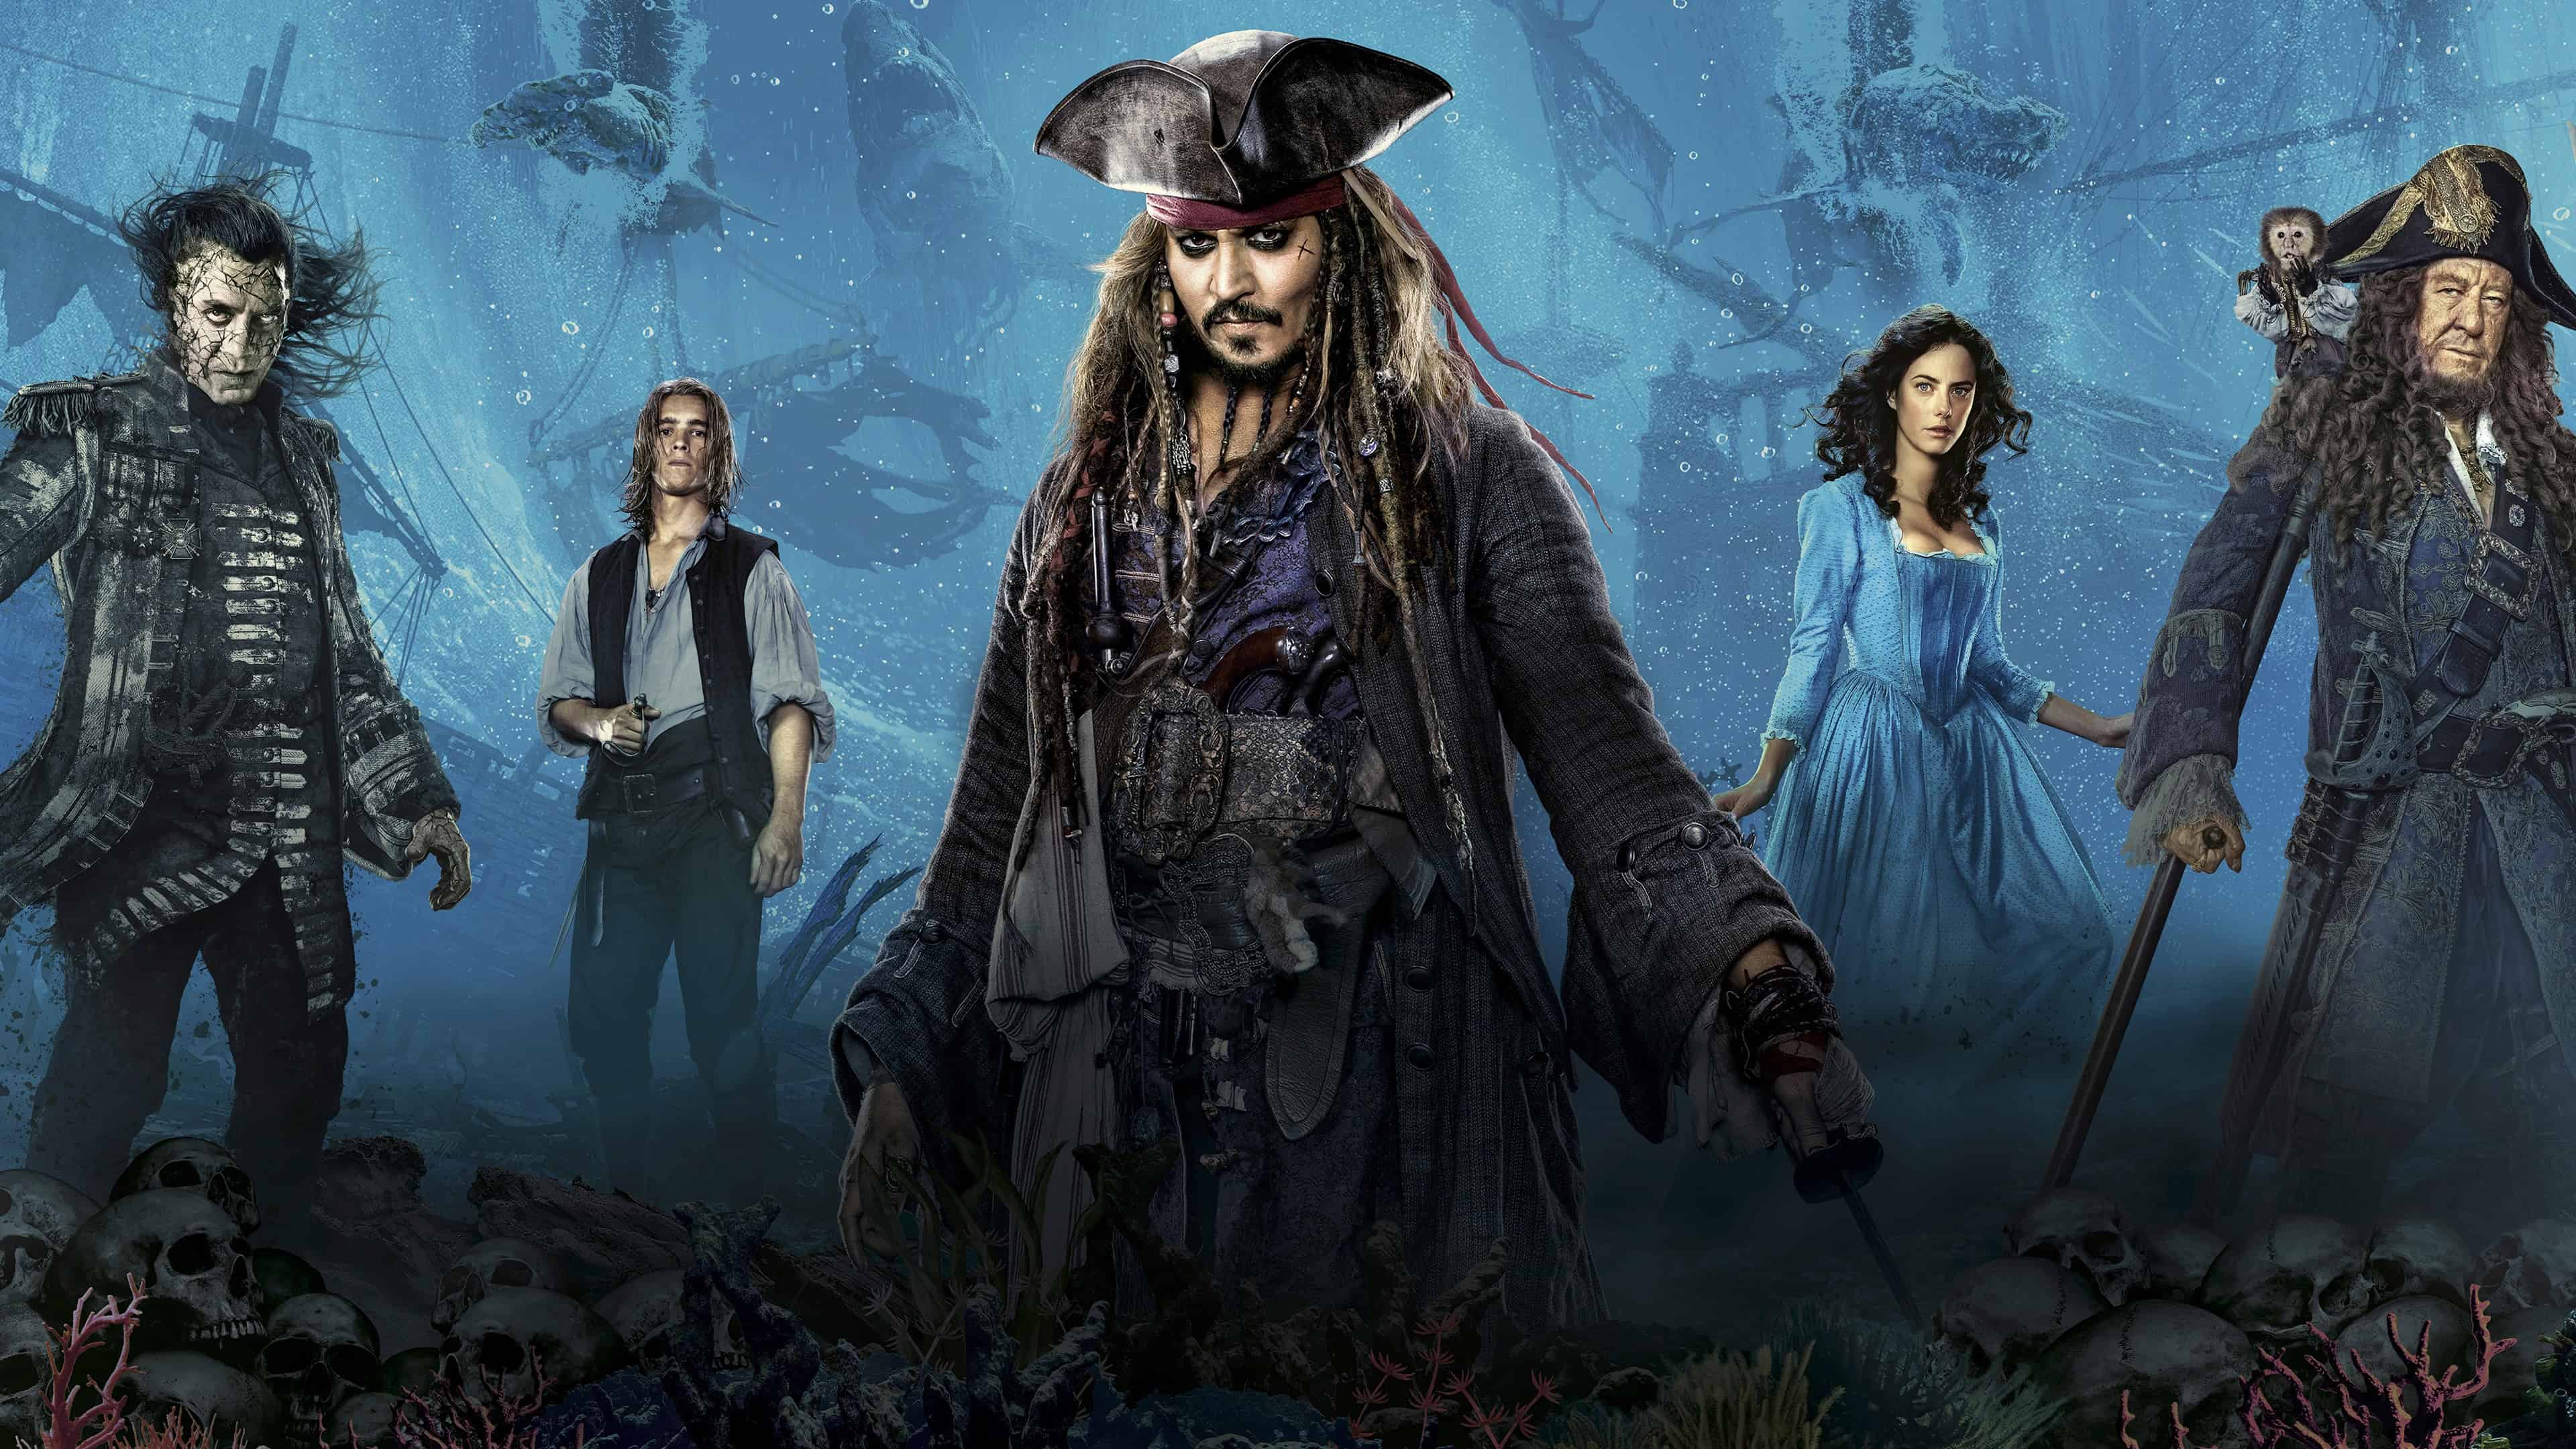 Pirates of the Caribbean 6 New Cast Will Johnny Depp Return as Captain Jack Sparrow